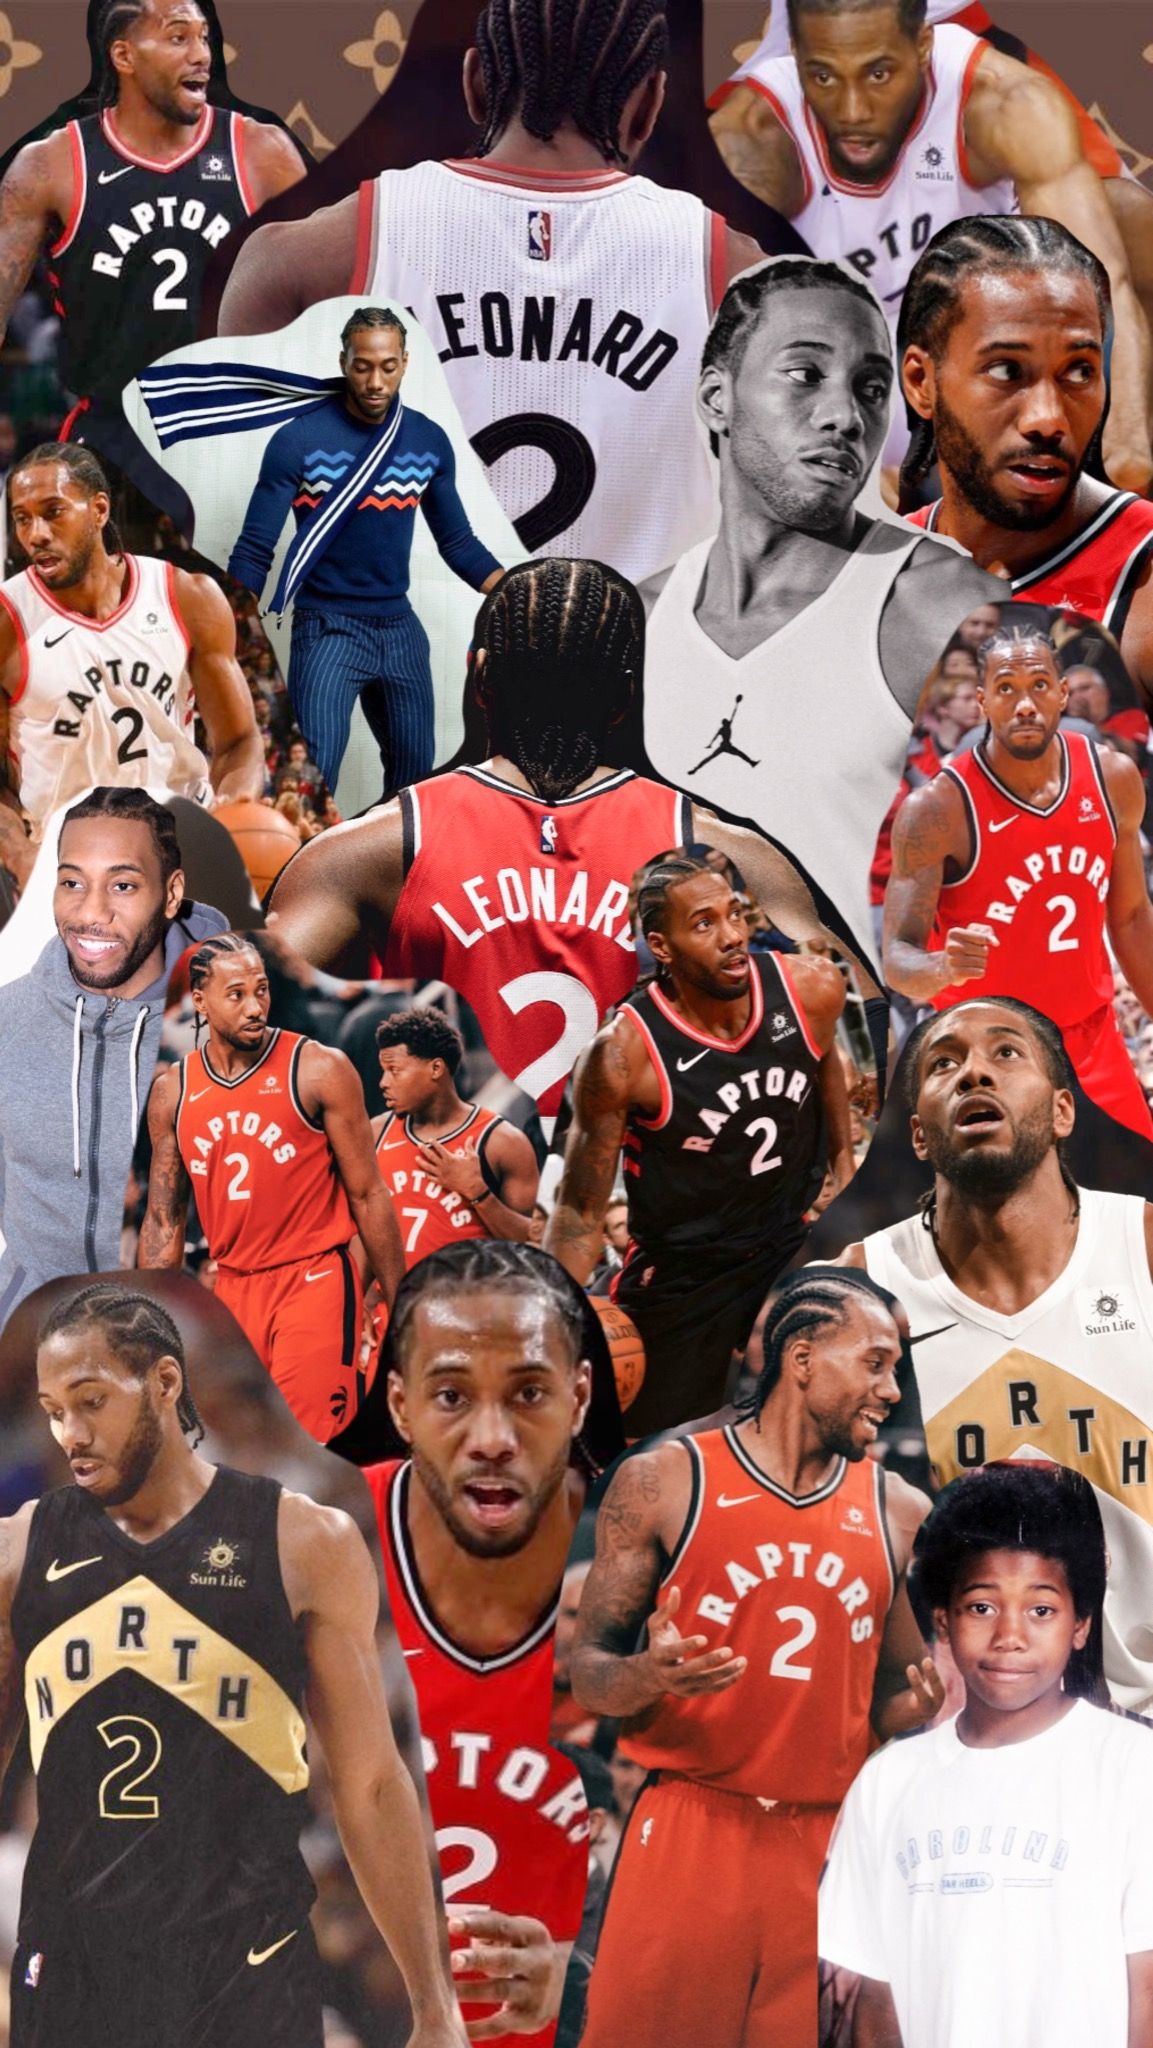 nba players collage